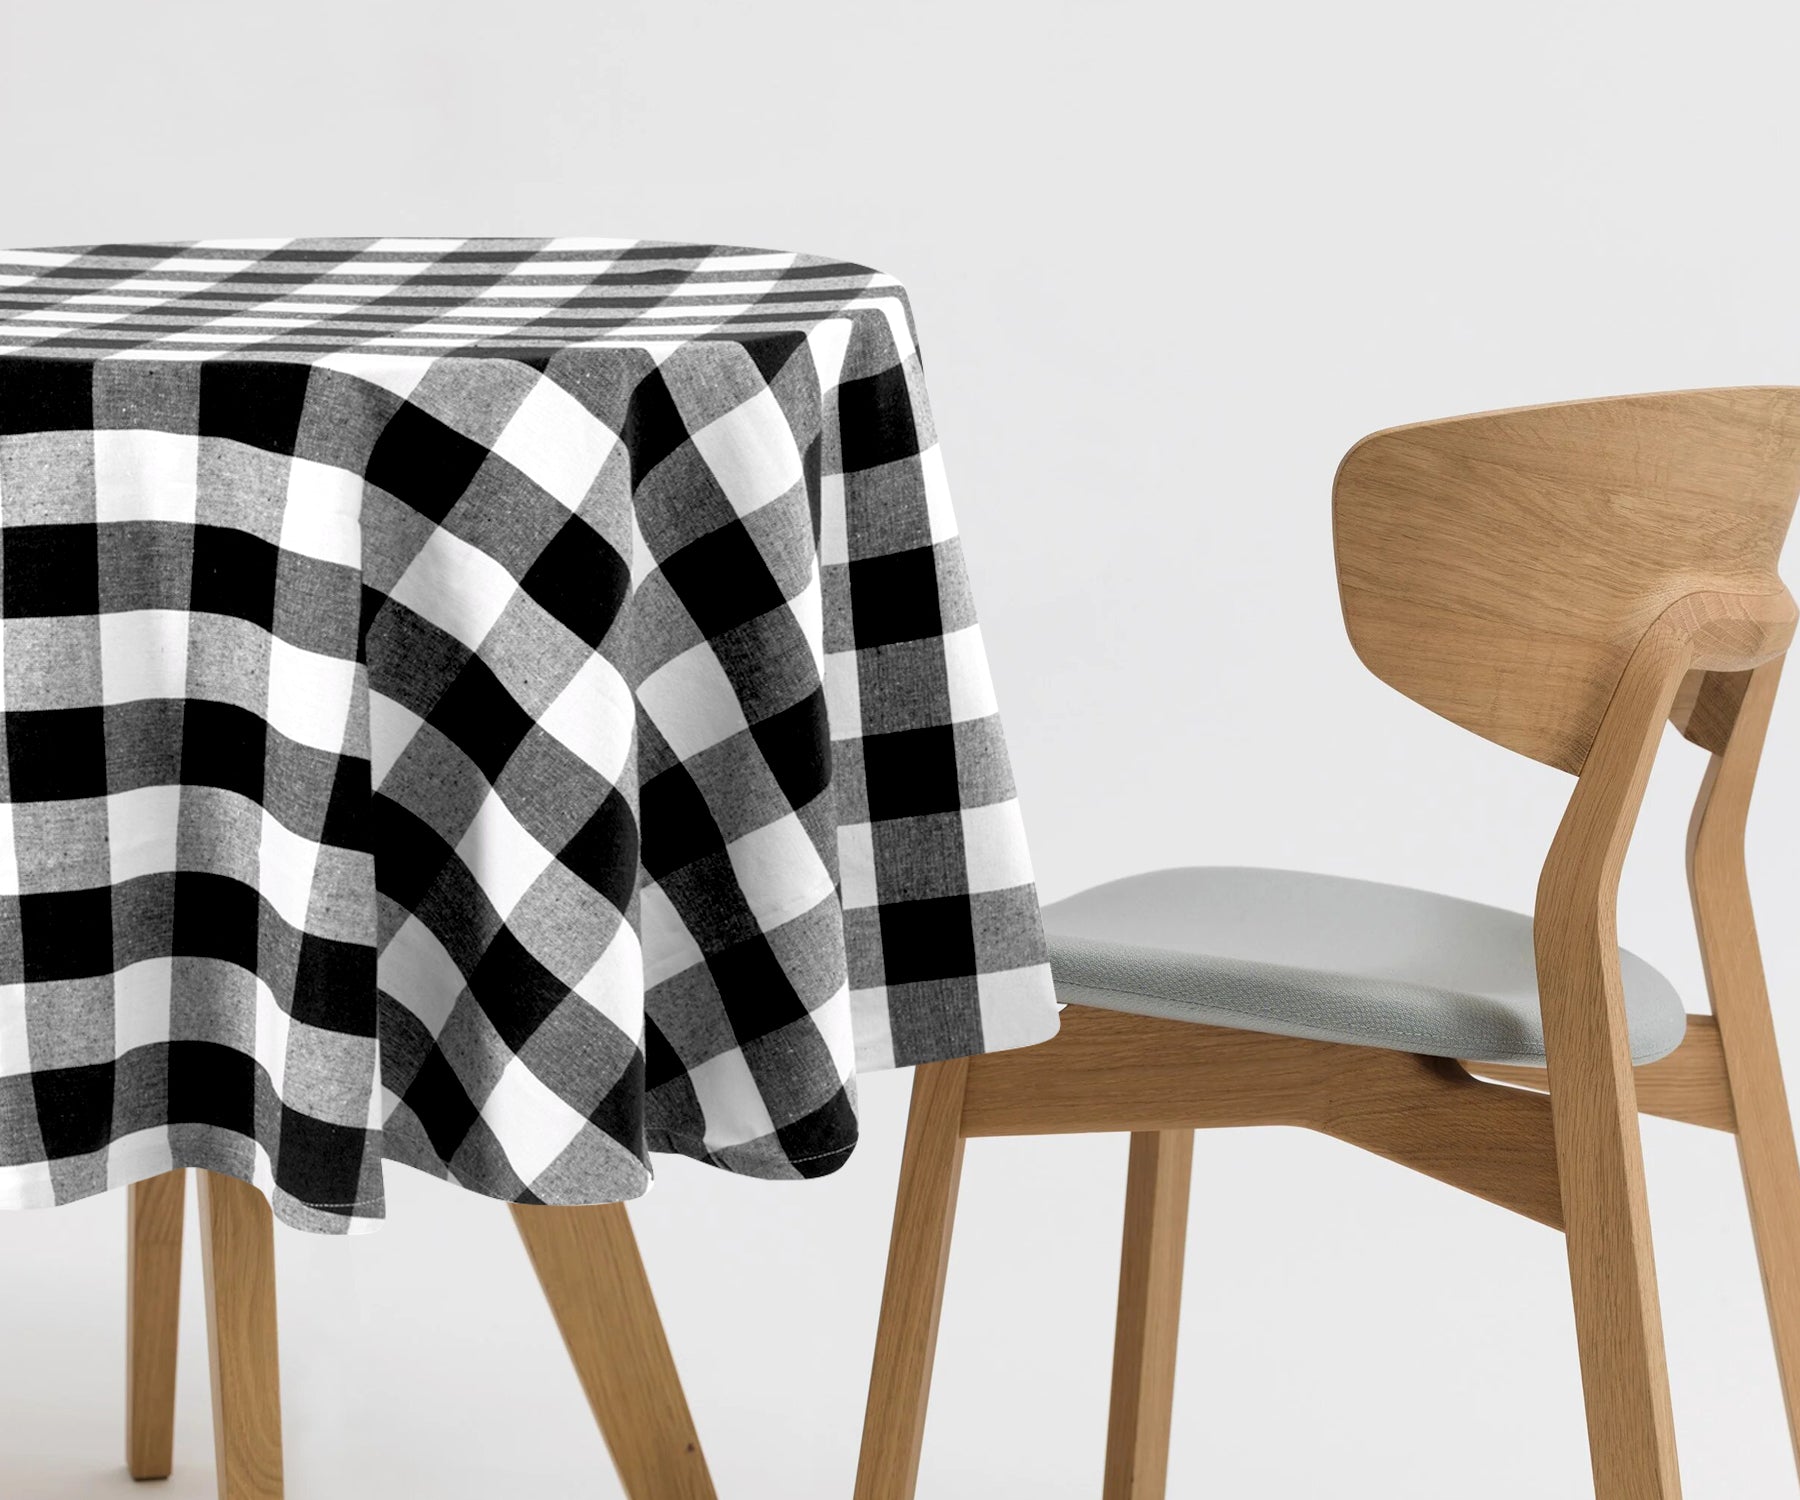 Checkered tablecloth, with its timeless appeal, suits both casual and formal dining settings.